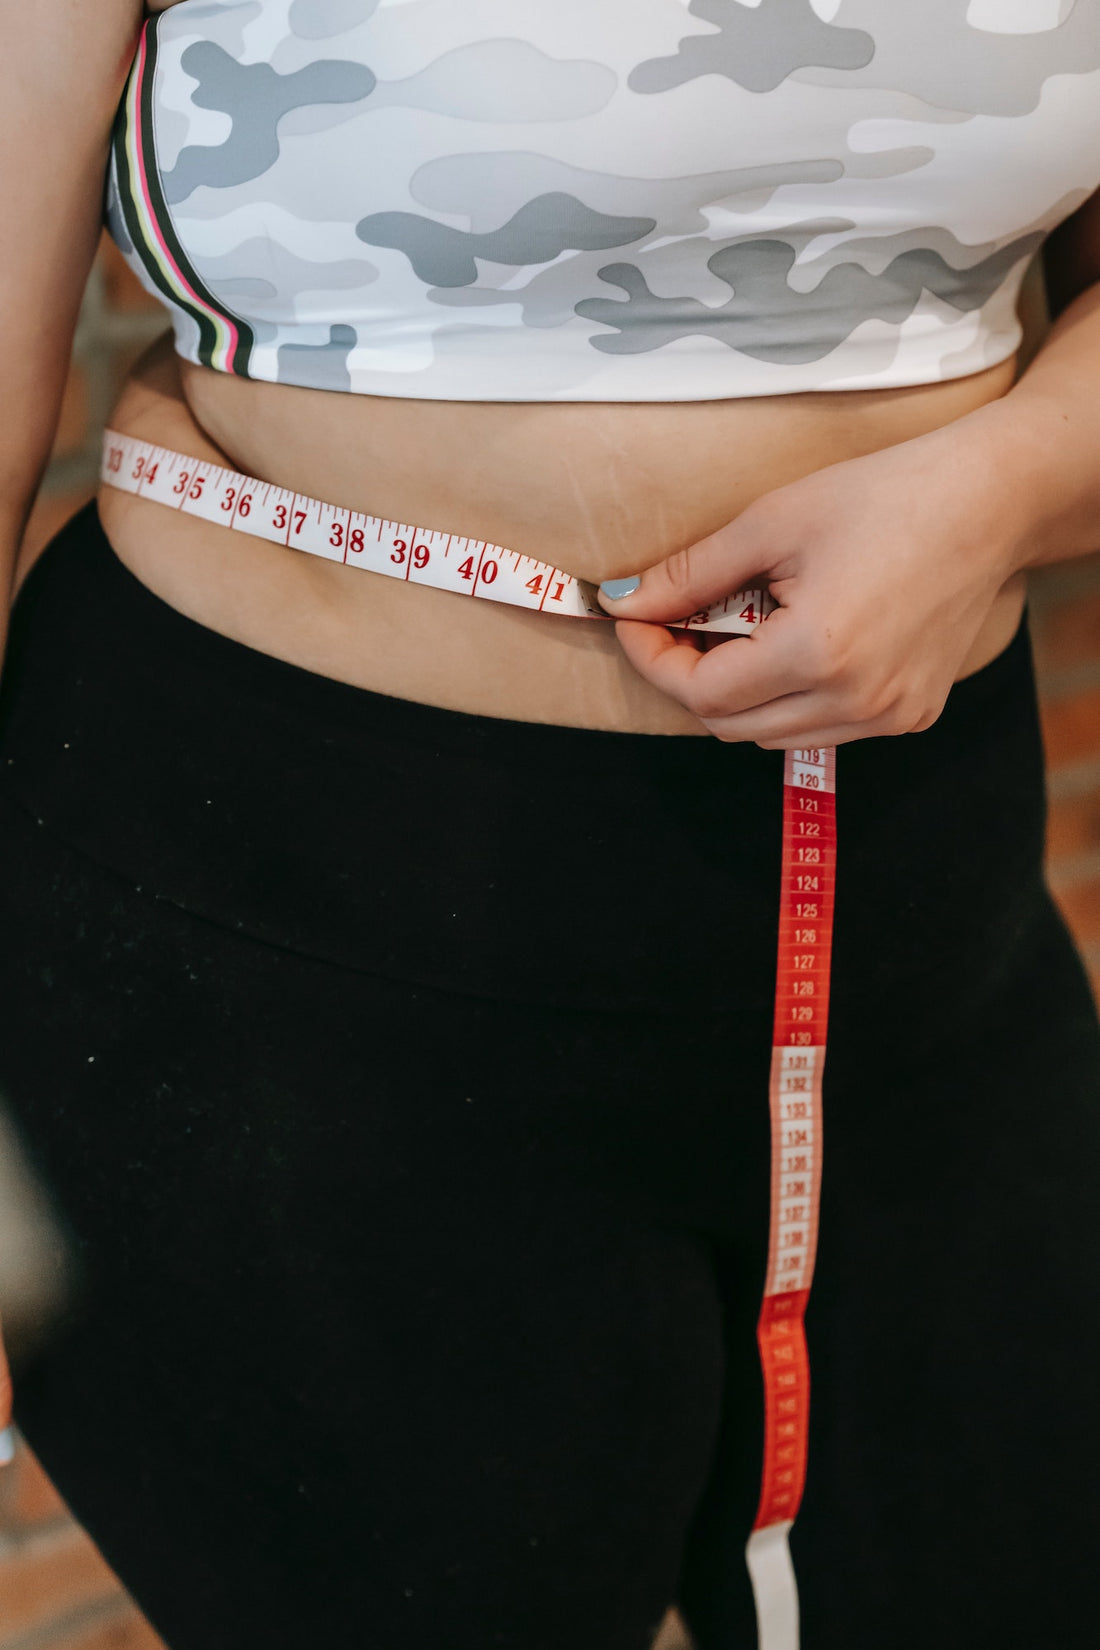 A woman in a sports bra and workout pants measures her waistline using a piece of red and white measuring tape.